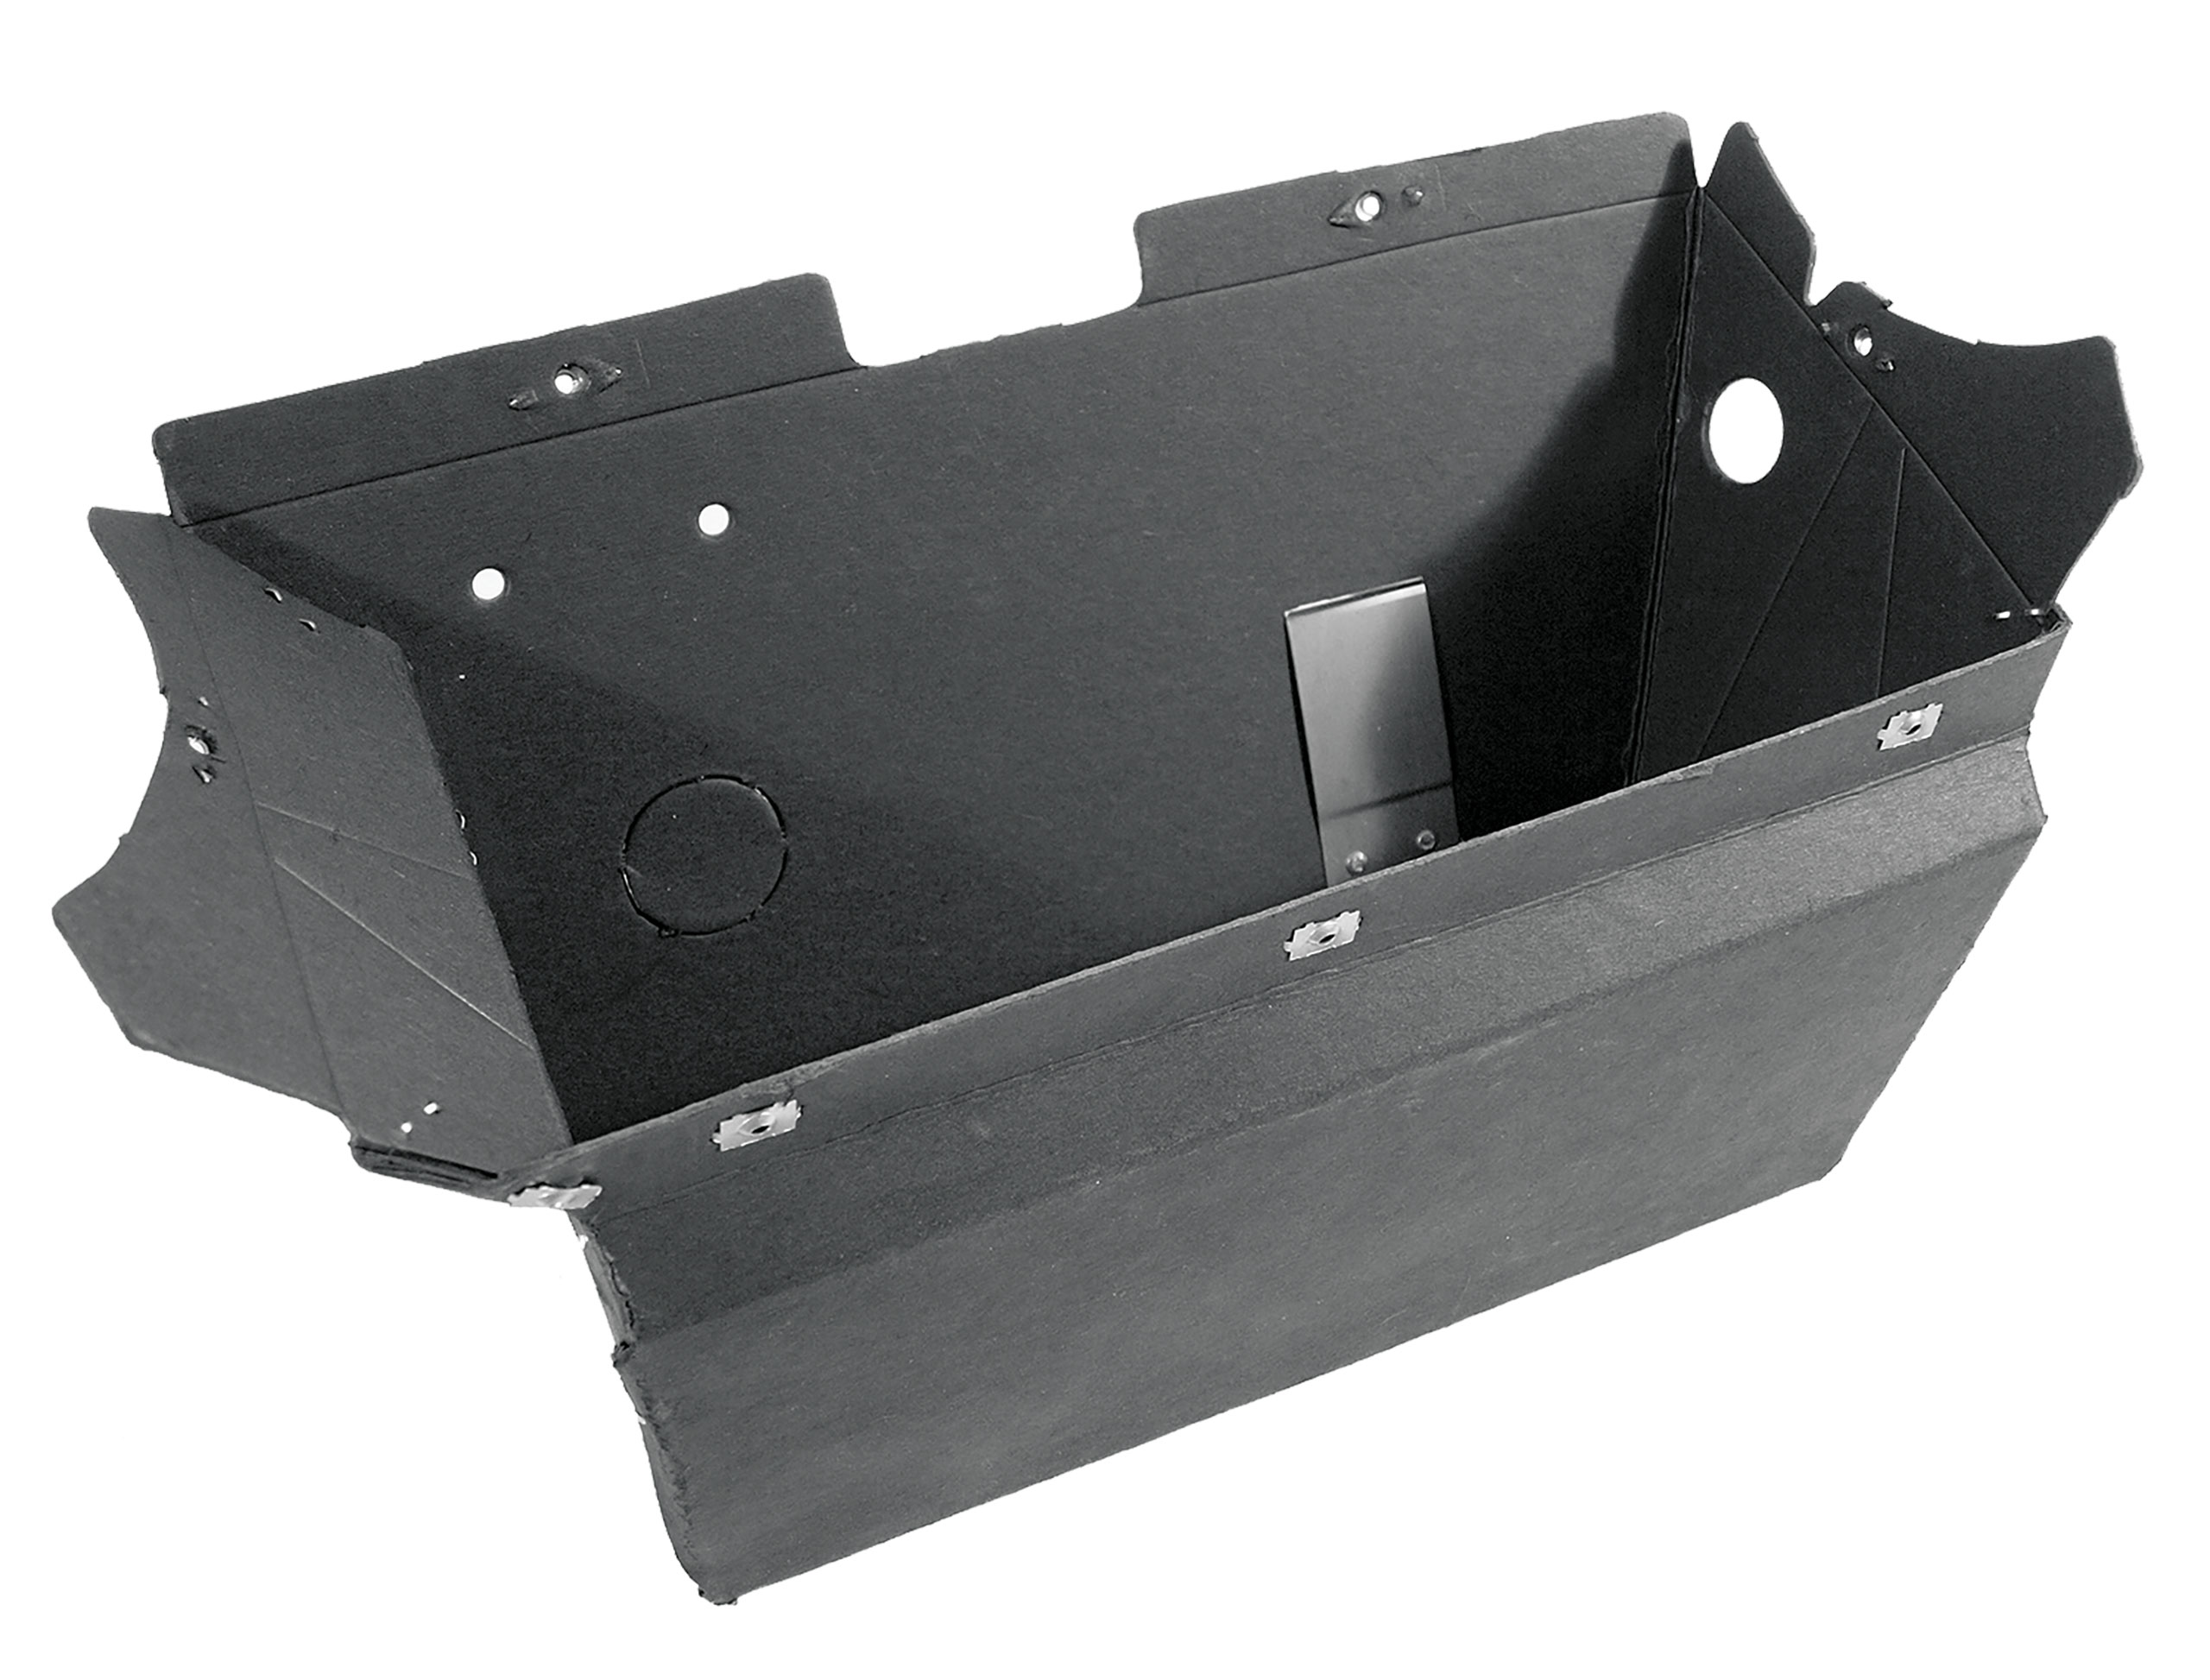 First Generation 1966 Ford Mustang Glove Box Liner W/Clip & Hole for Flasher - Black Chipboard - Scott Drake